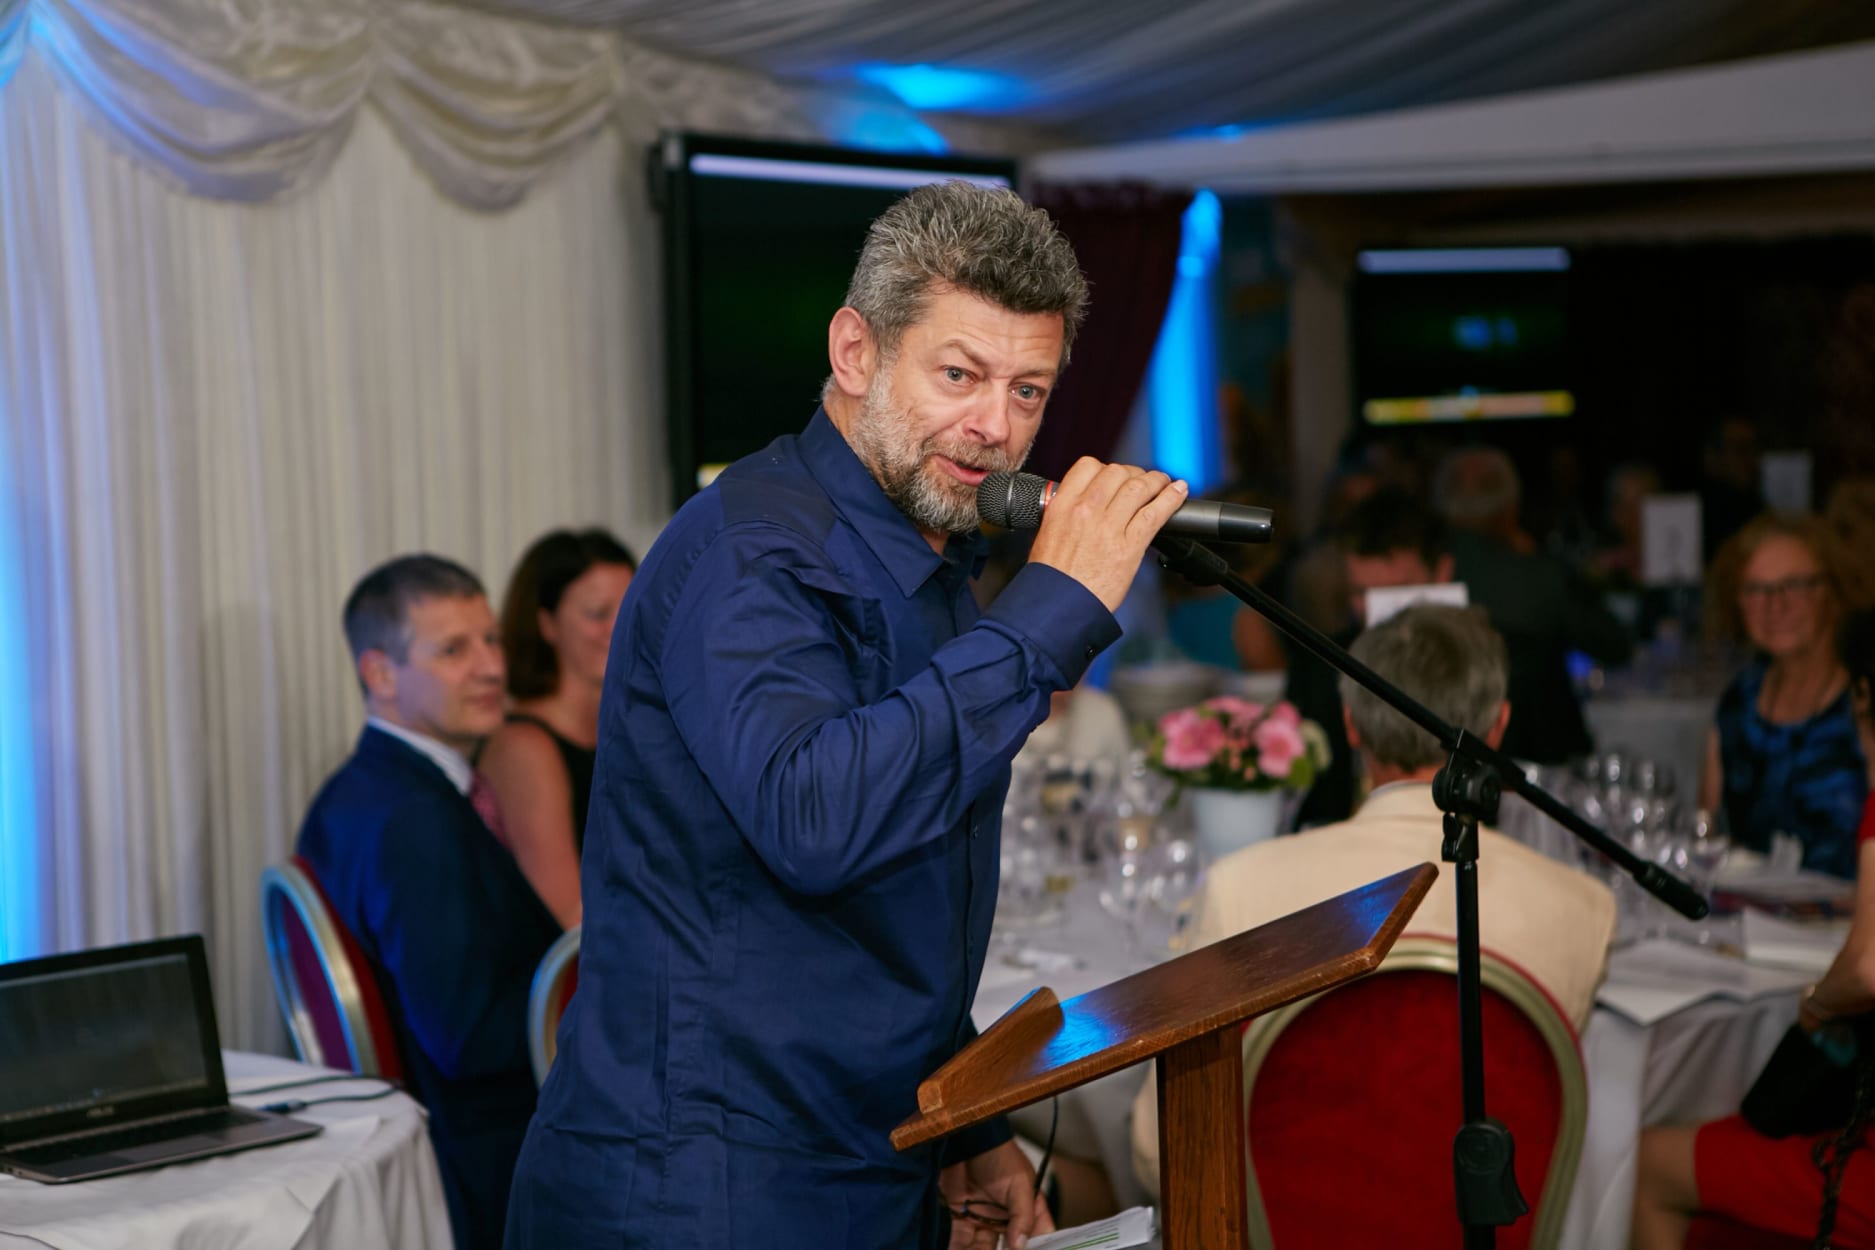 Actor and director Andy Serkis was master of ceremonies at the launch event for SpringBoard.